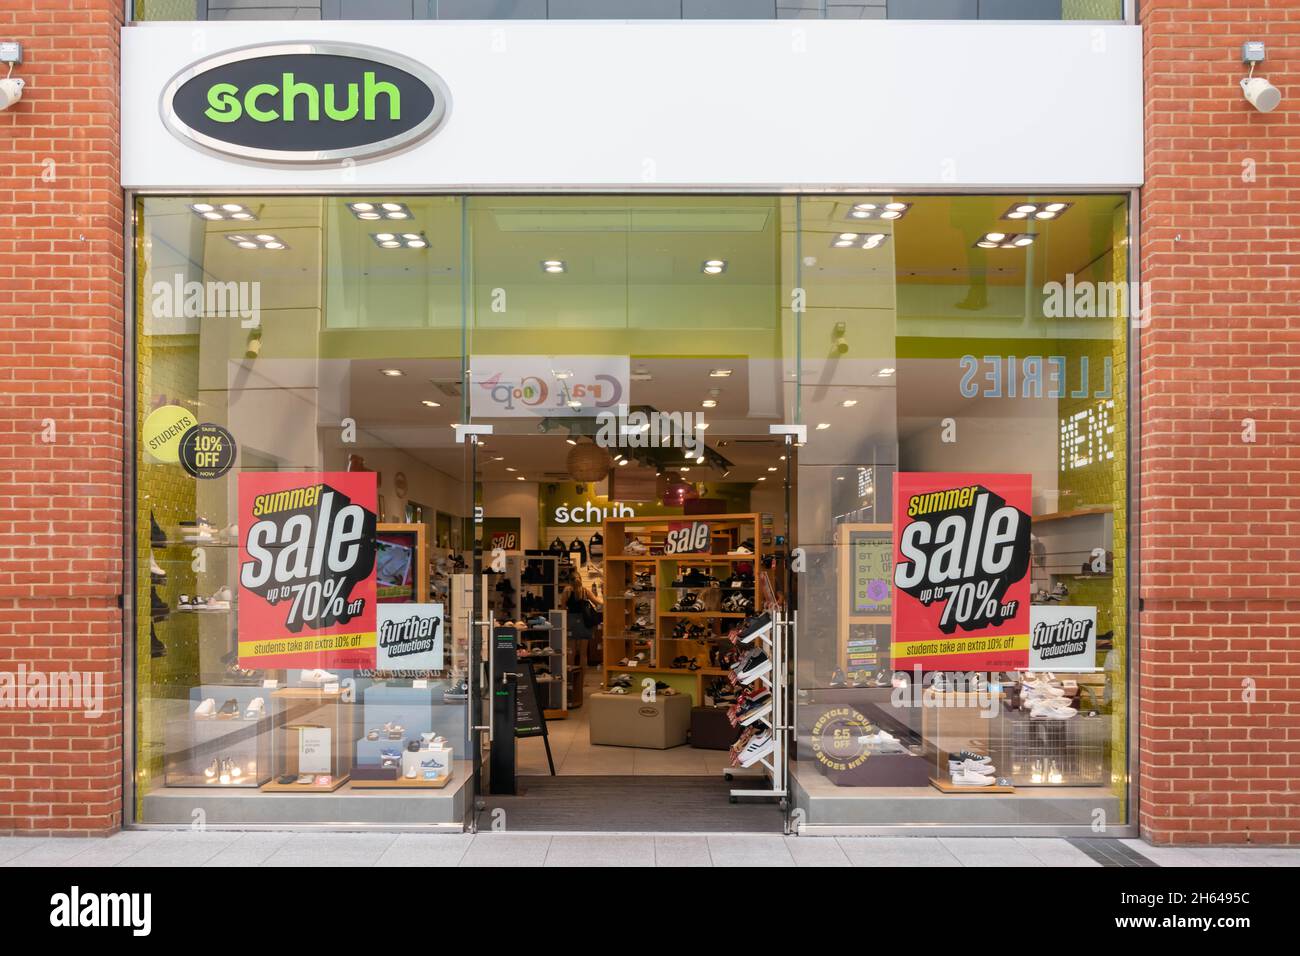 High Wycombe, England - July 21st 2021: Schuh shop in the Eden shopping centre. The chain operates around 132 stores. Stock Photo